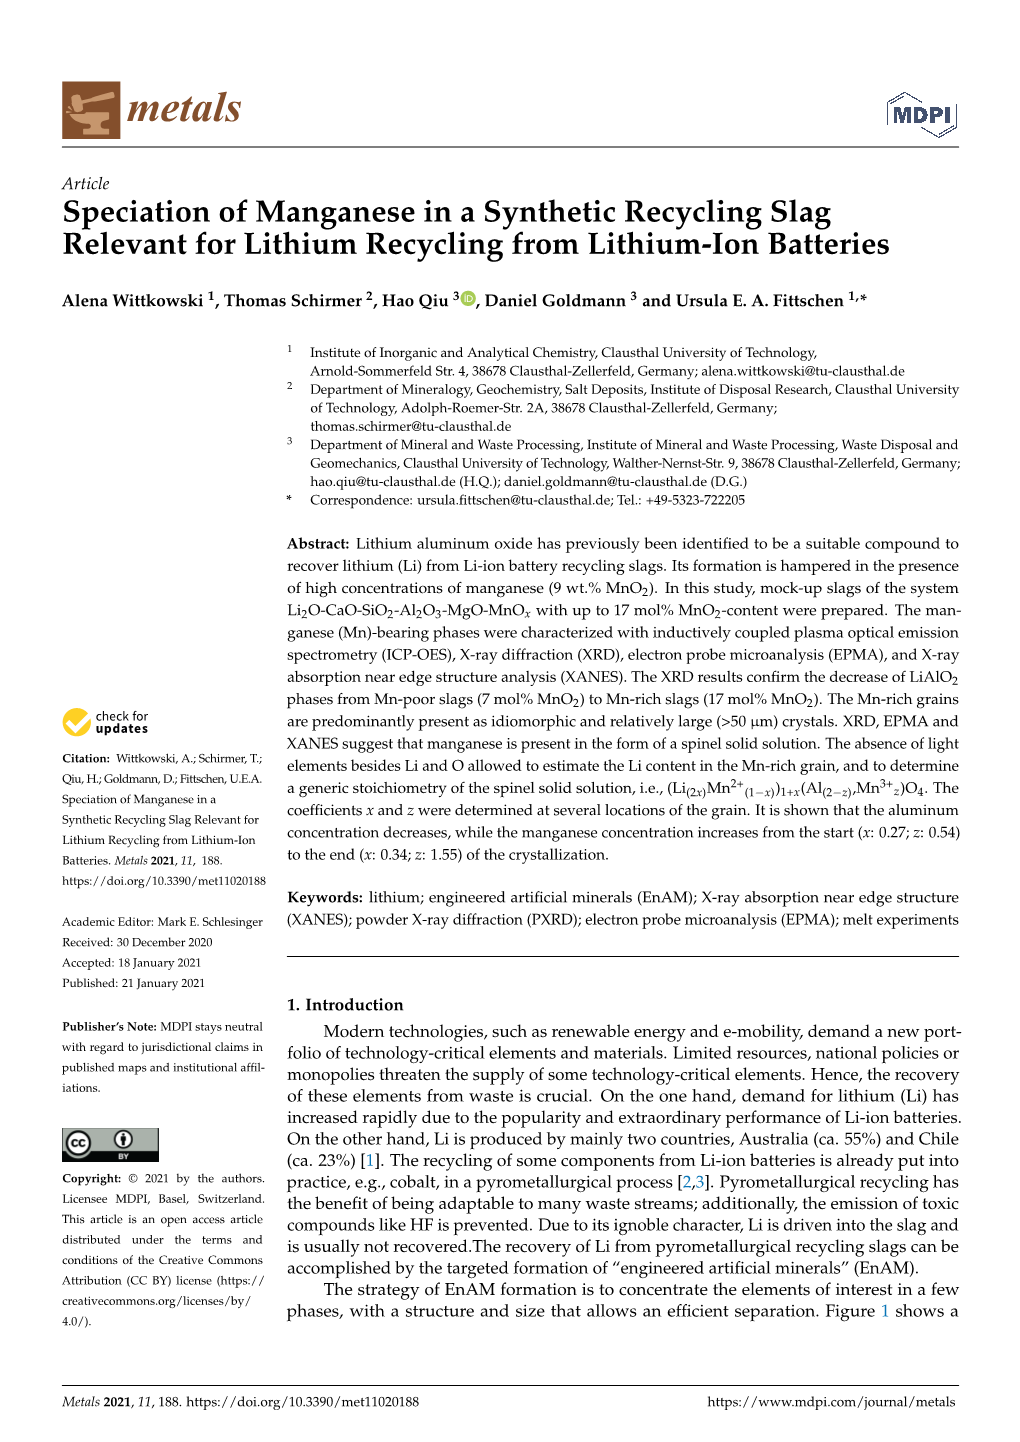 Speciation of Manganese in a Synthetic Recycling Slag Relevant for Lithium Recycling from Lithium-Ion Batteries